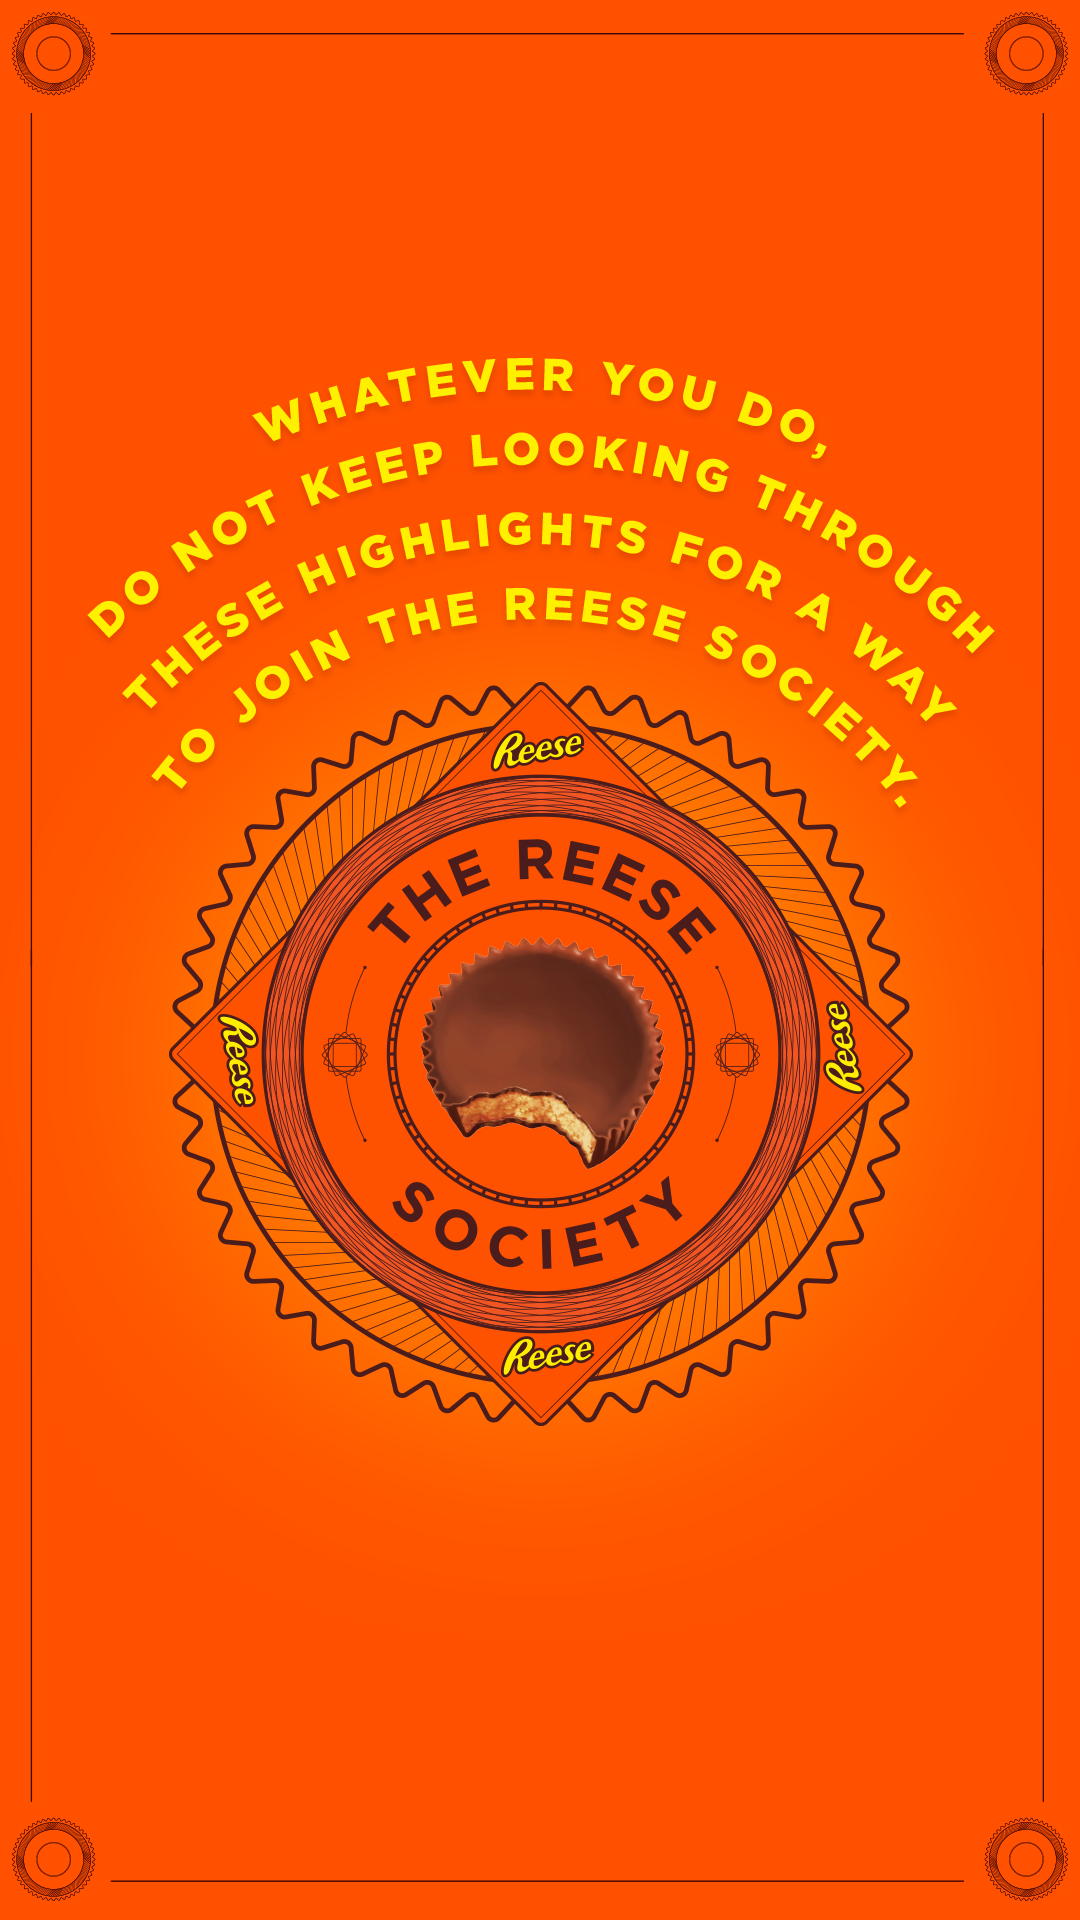 Reese-Society-IG_0000_Whatever-you-do.png